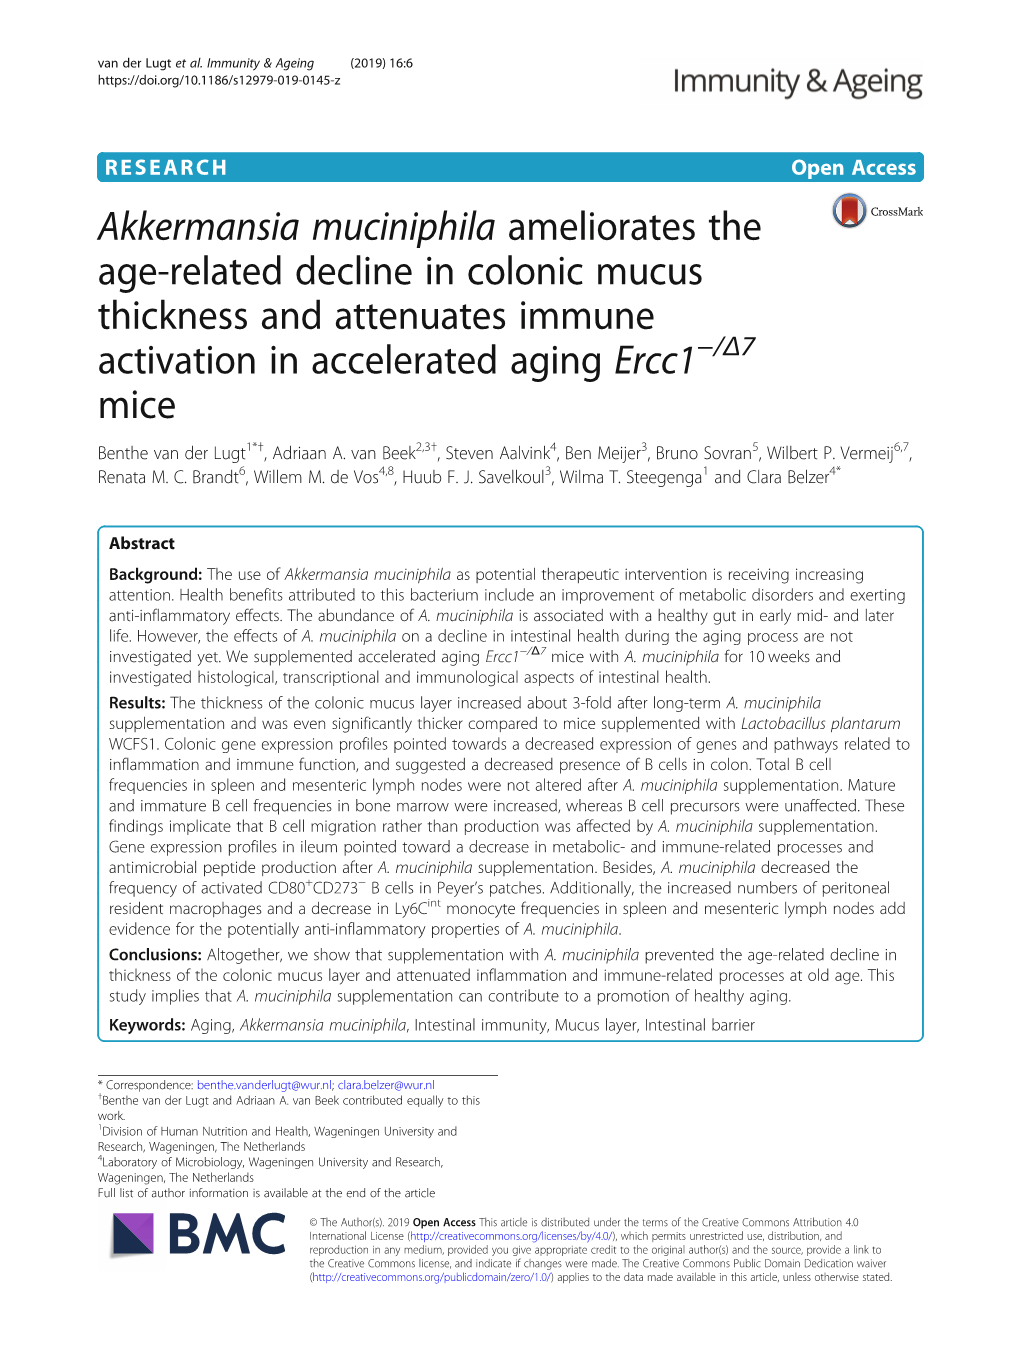 Akkermansia Muciniphila Ameliorates the Age-Related Decline in Colonic